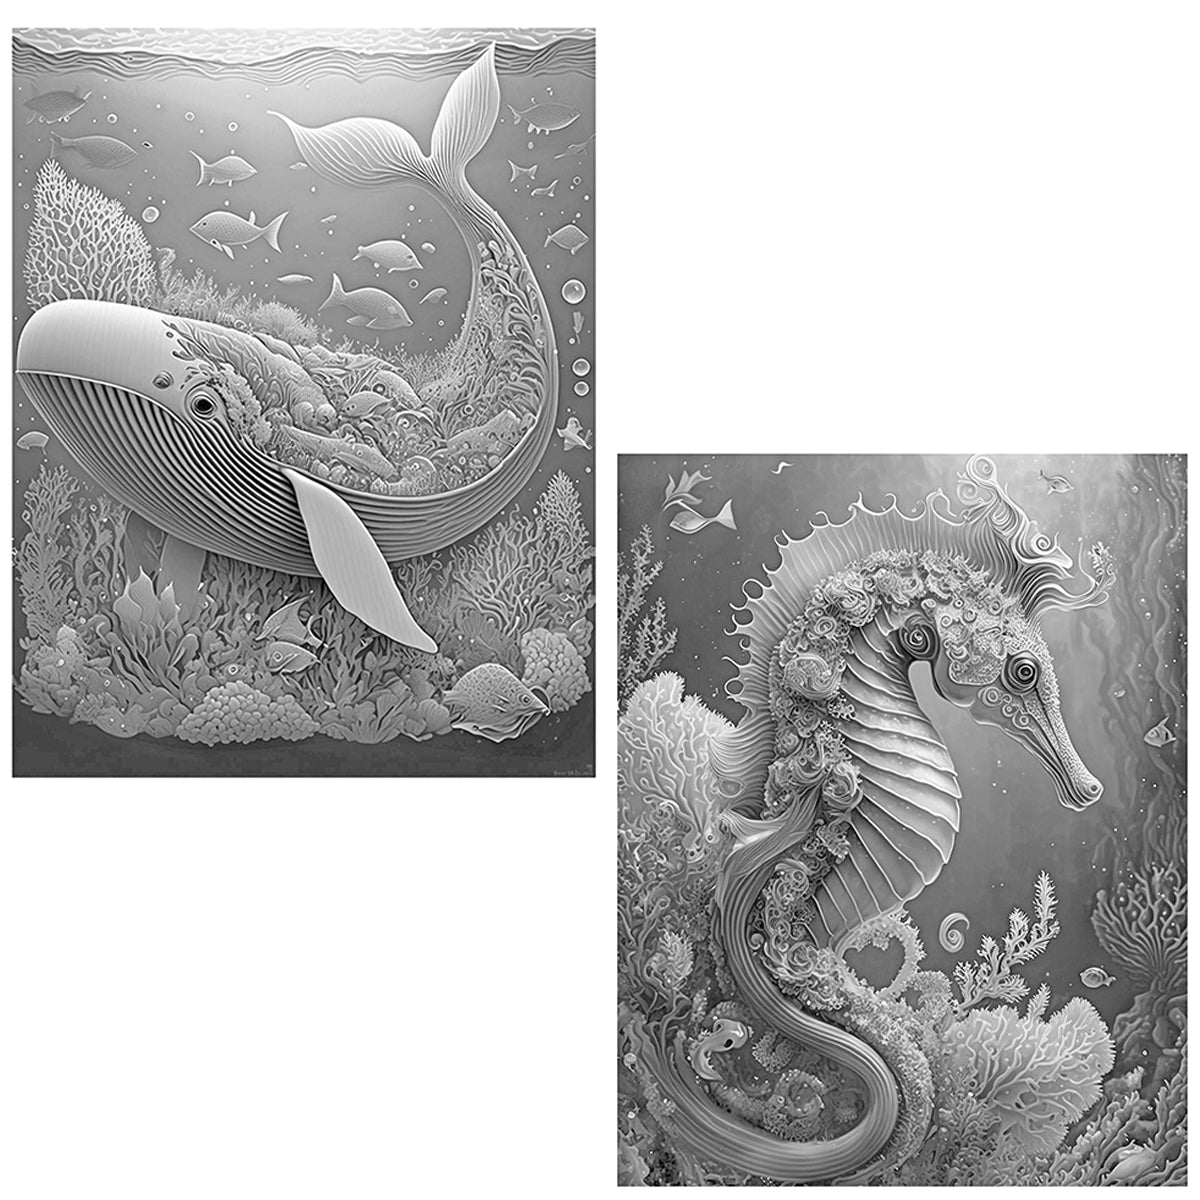 Great2bColorful - 16" x 20" Advanced Grayscale Coloring Sheets, 2 Pack Set - "Fantastical Sea Creatures"